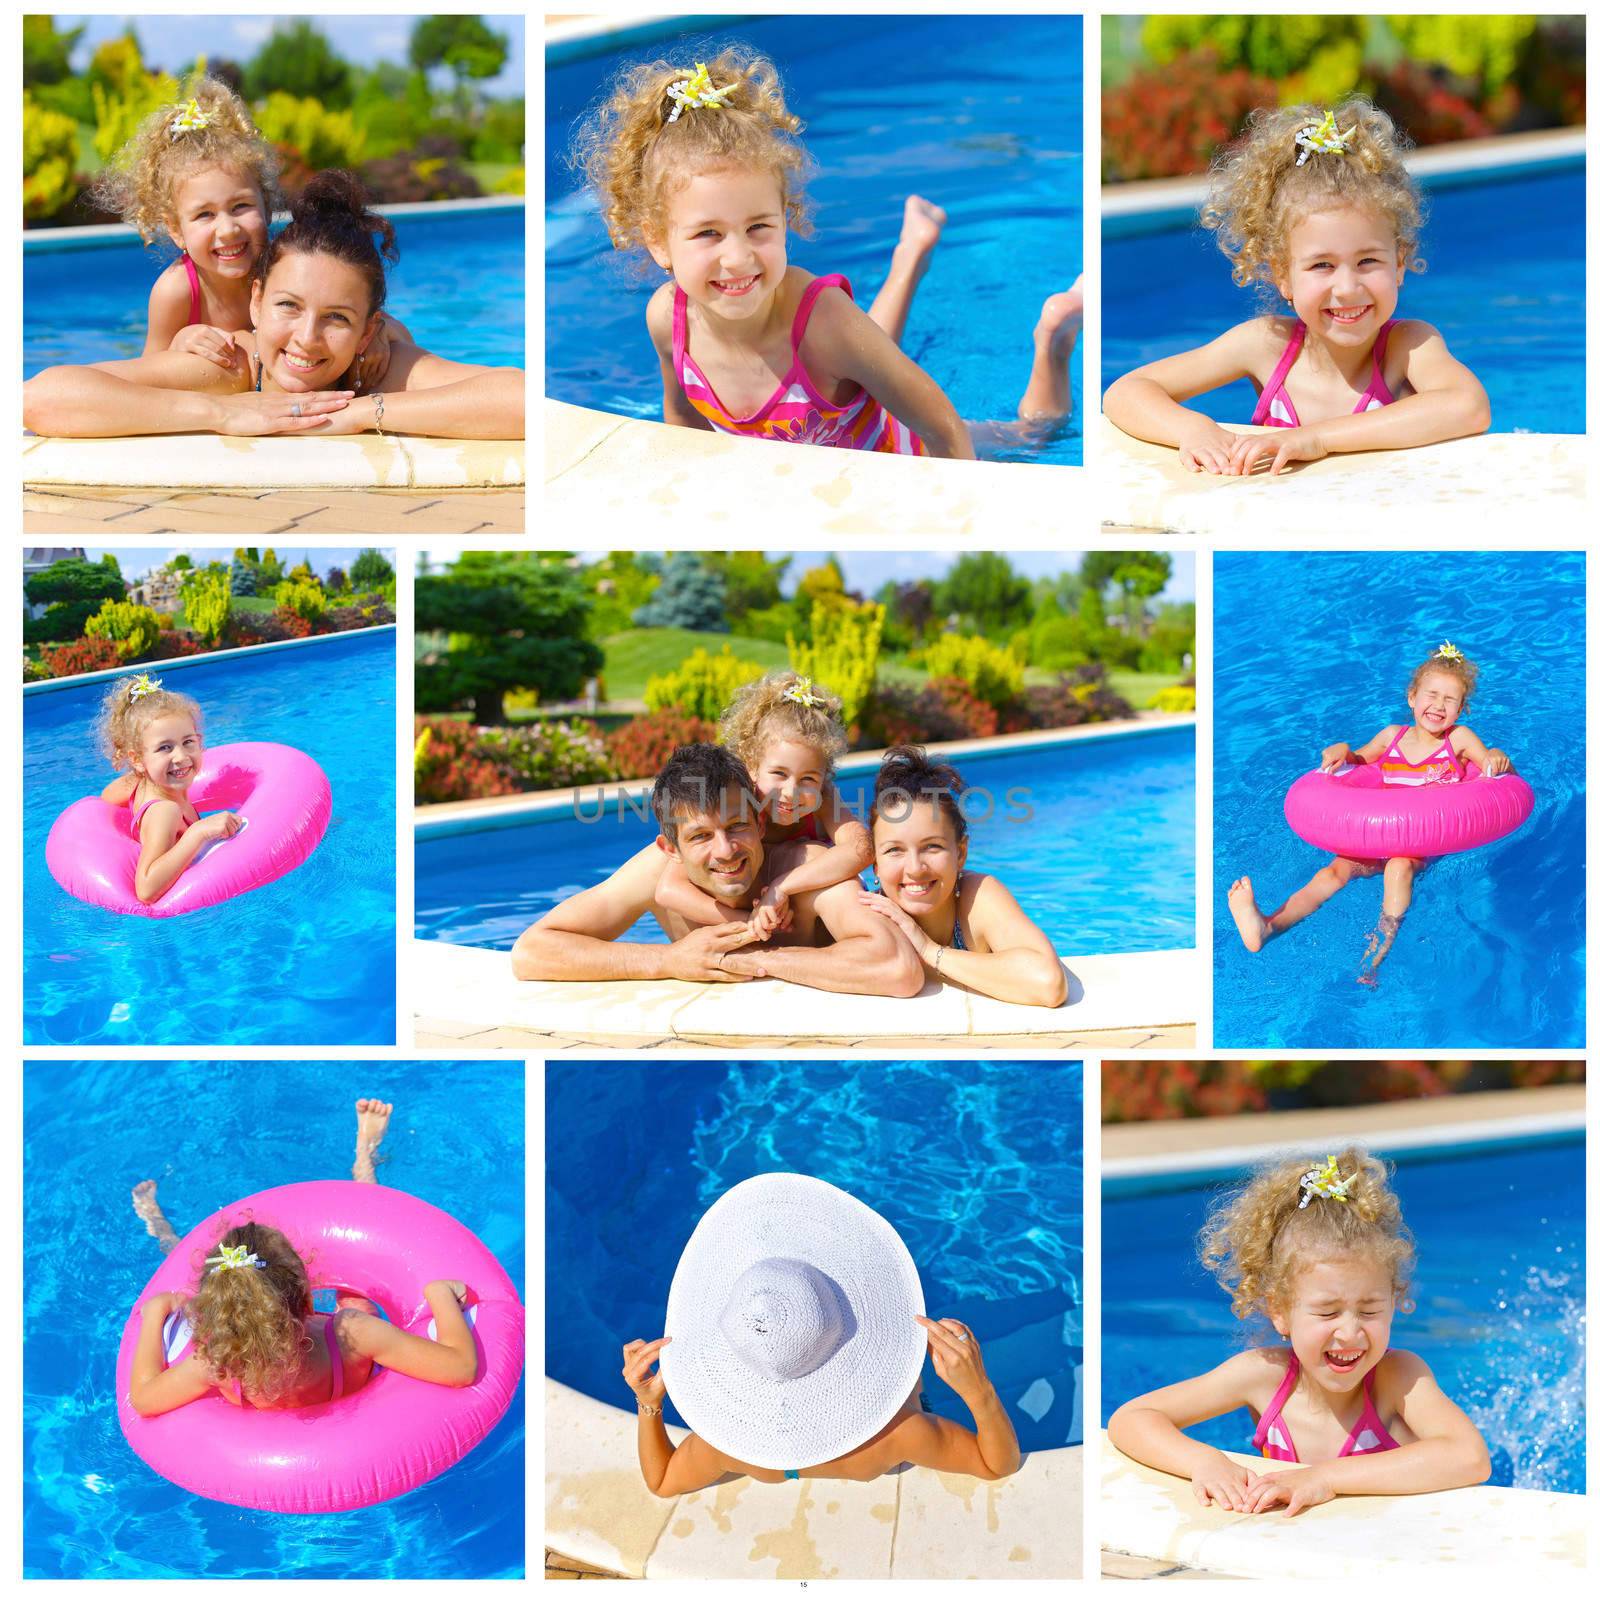 Collage of images pretty little girl with her parent in swimming pool outdoors